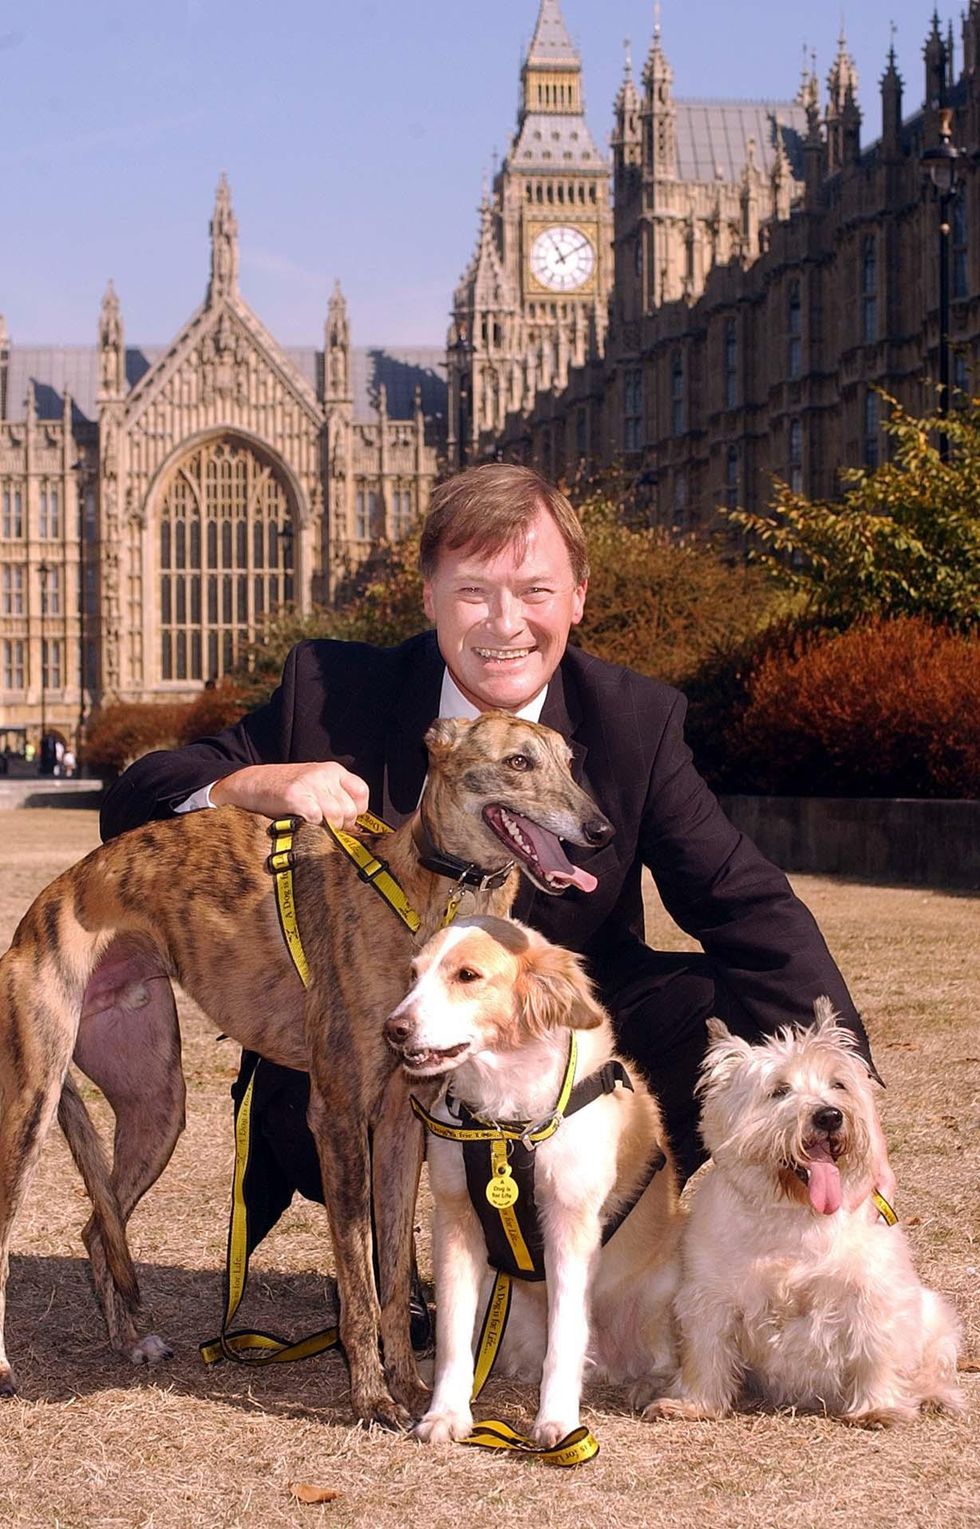 David Amess, MP for Southend West in Essex, outside the Houses of Parliament in Westminster in 2003.